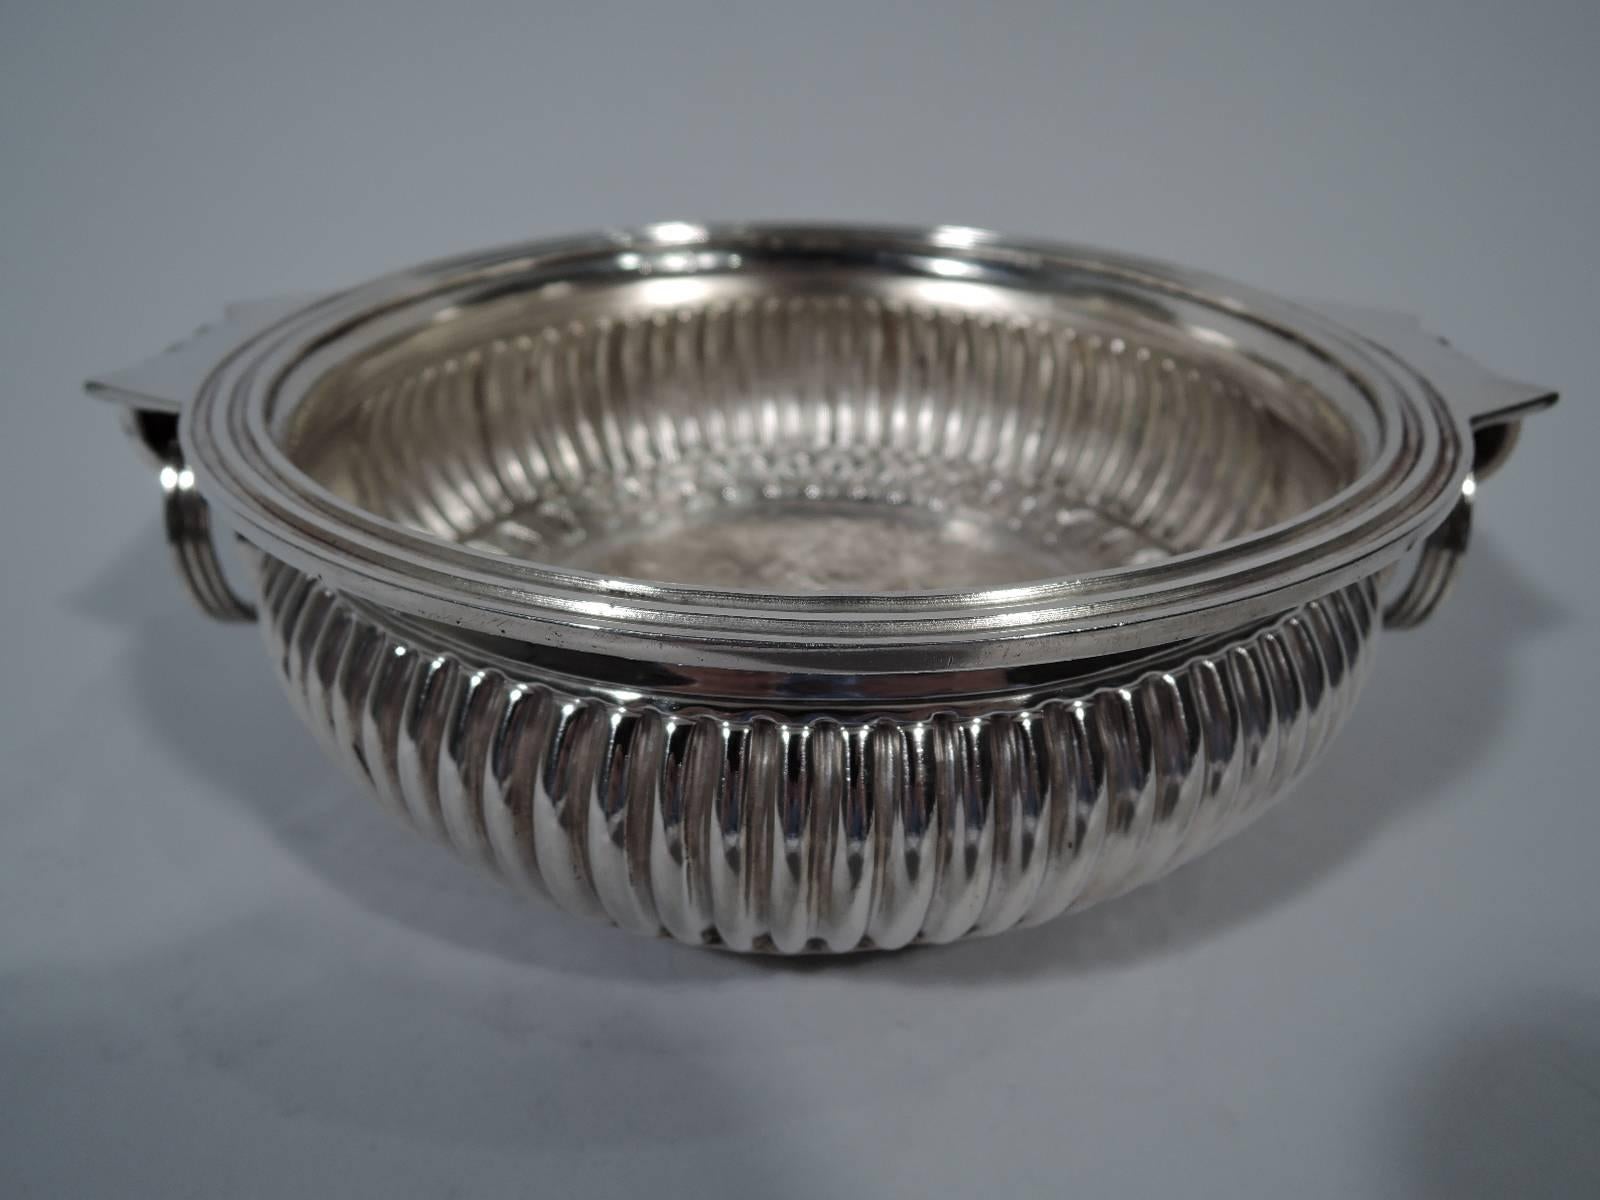 Traditional sterling silver bowl. Made by Miss India in Jaipur, India. Bellied with reeded rim, gadrooning, and small inset foot ring. Fluted side handles with jangly loose-mounted rings. Bottom exterior decorated with central flower surrounded by